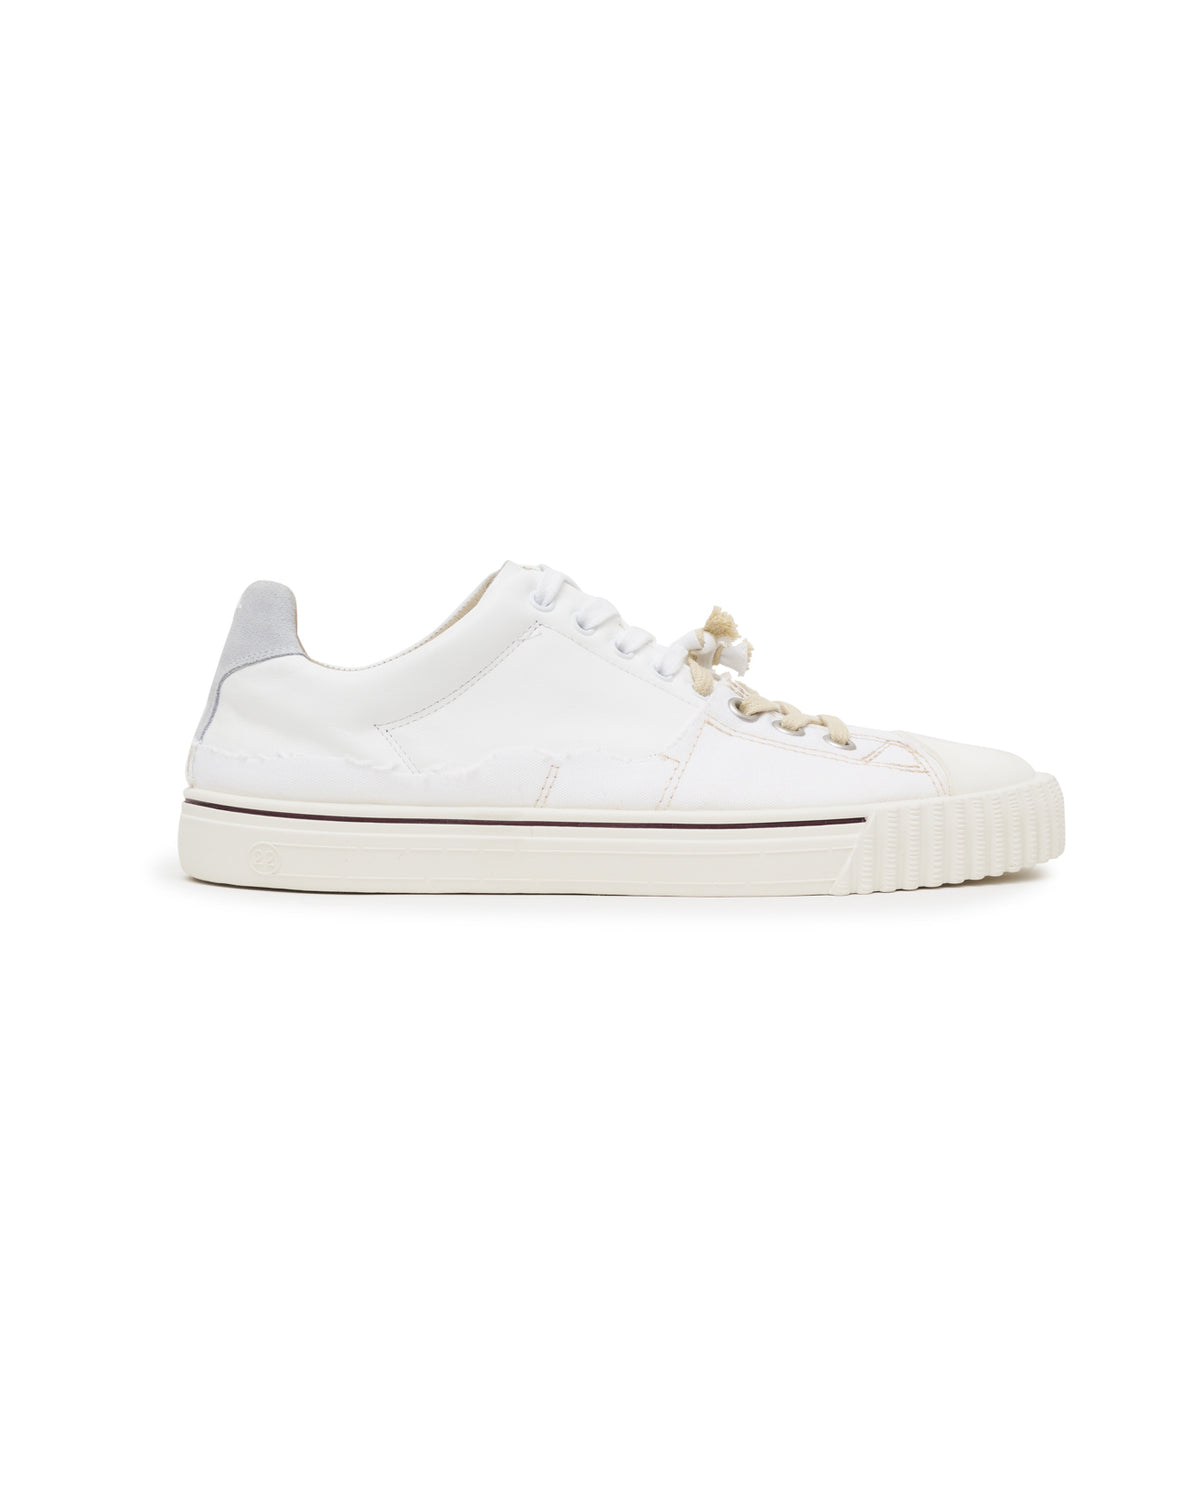 New Evolution Low Top Sneakers - White